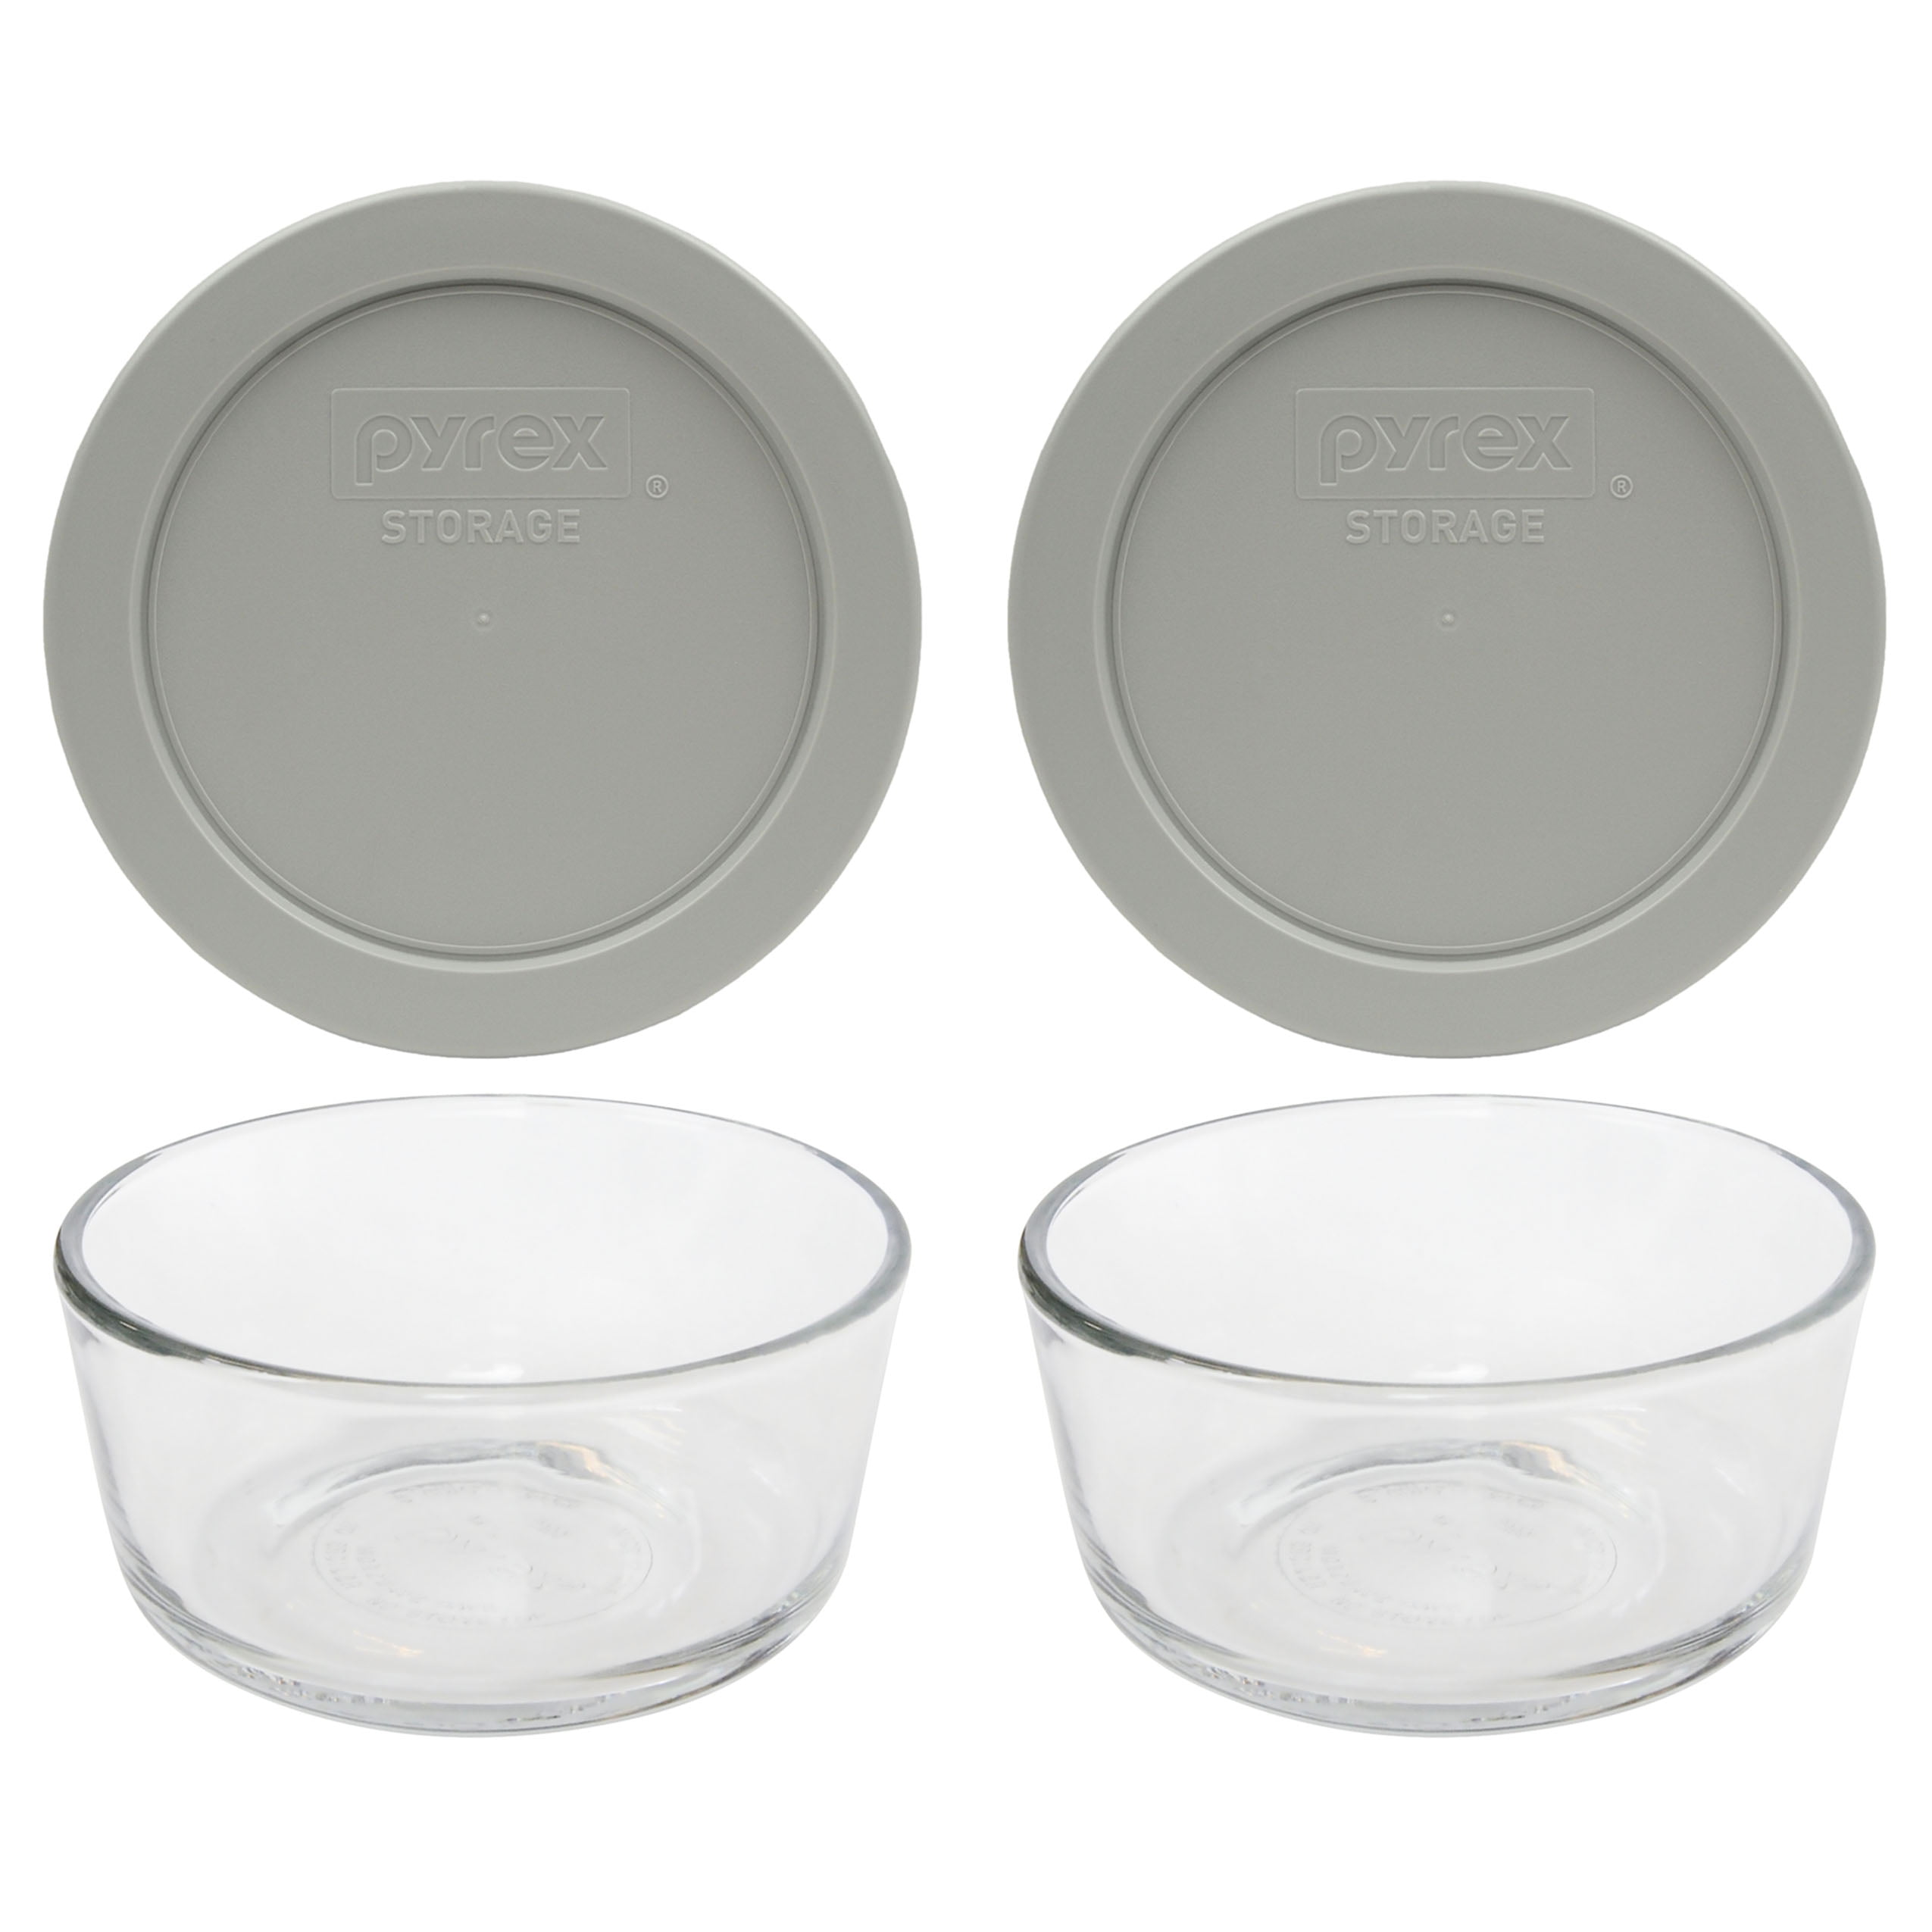 Pyrex Simply Store 7200 2-Cup Glass Food Storage Bowl with 7200-PC Orange Plastic Lid (4-Pack)